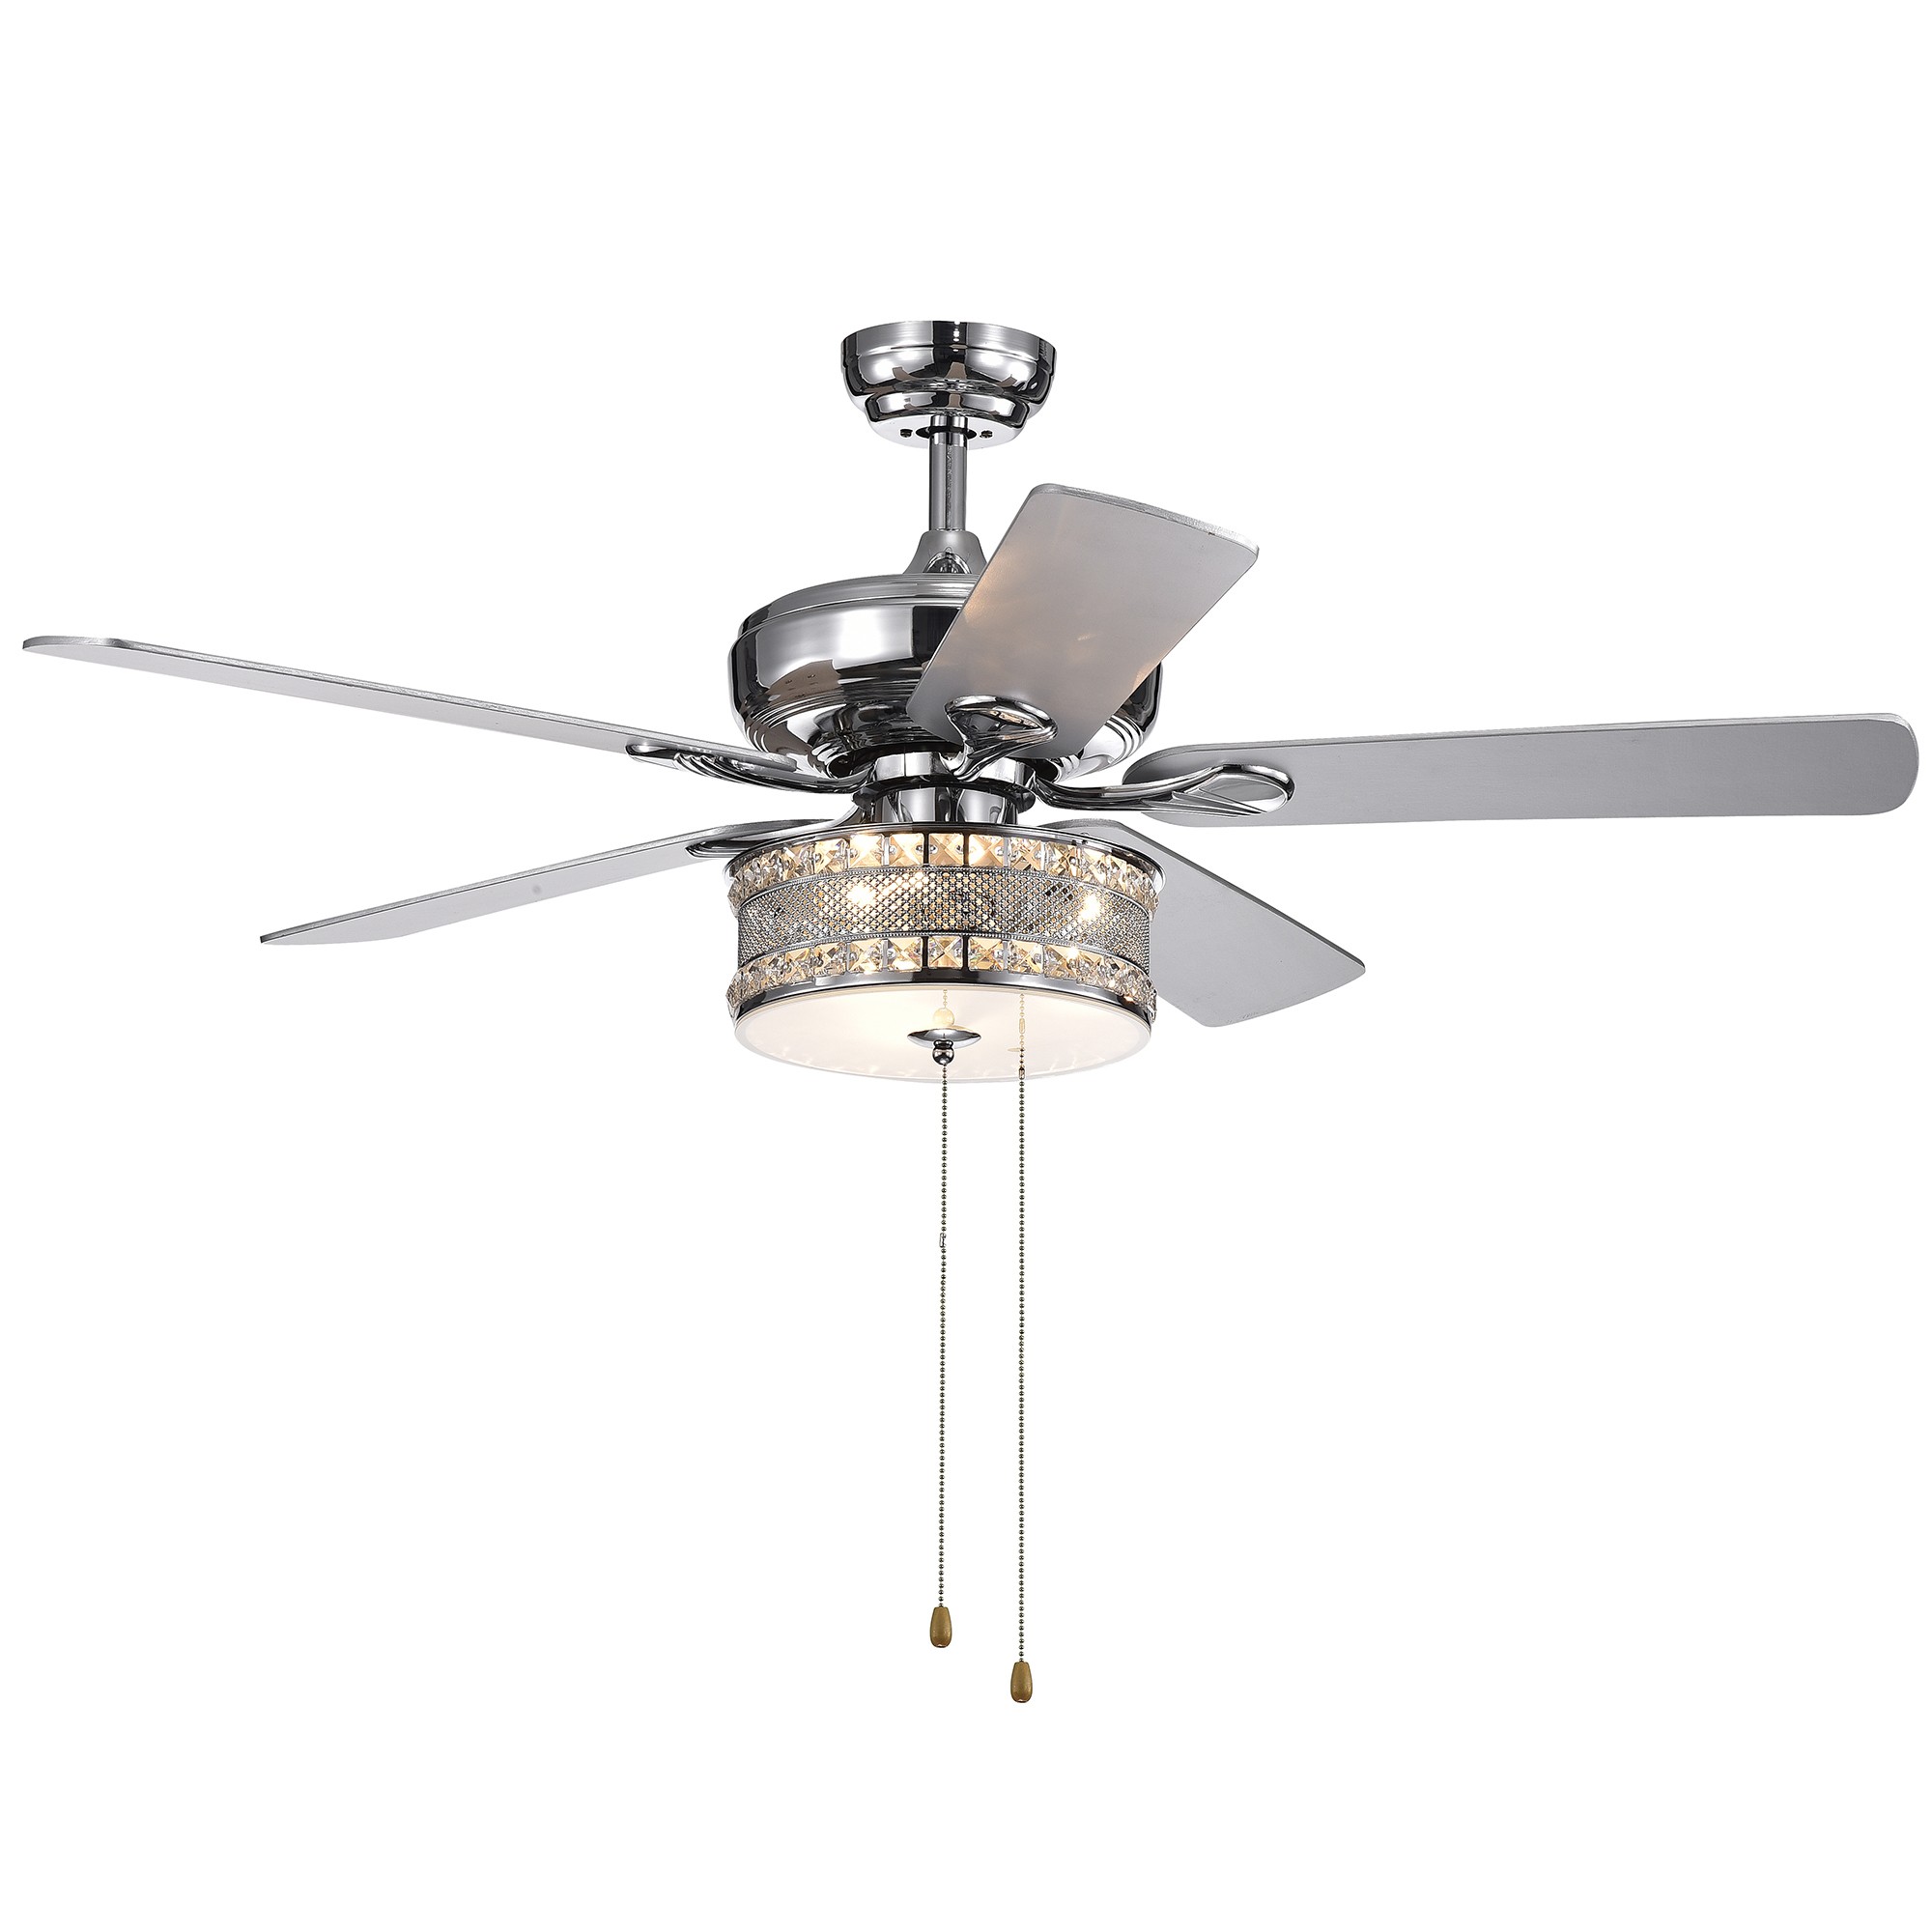 Davrin 5-Blade 52-Inch Chrome Lighted Ceiling Fans with 3-Light Crystal Drum Lamp (Optional Remote)